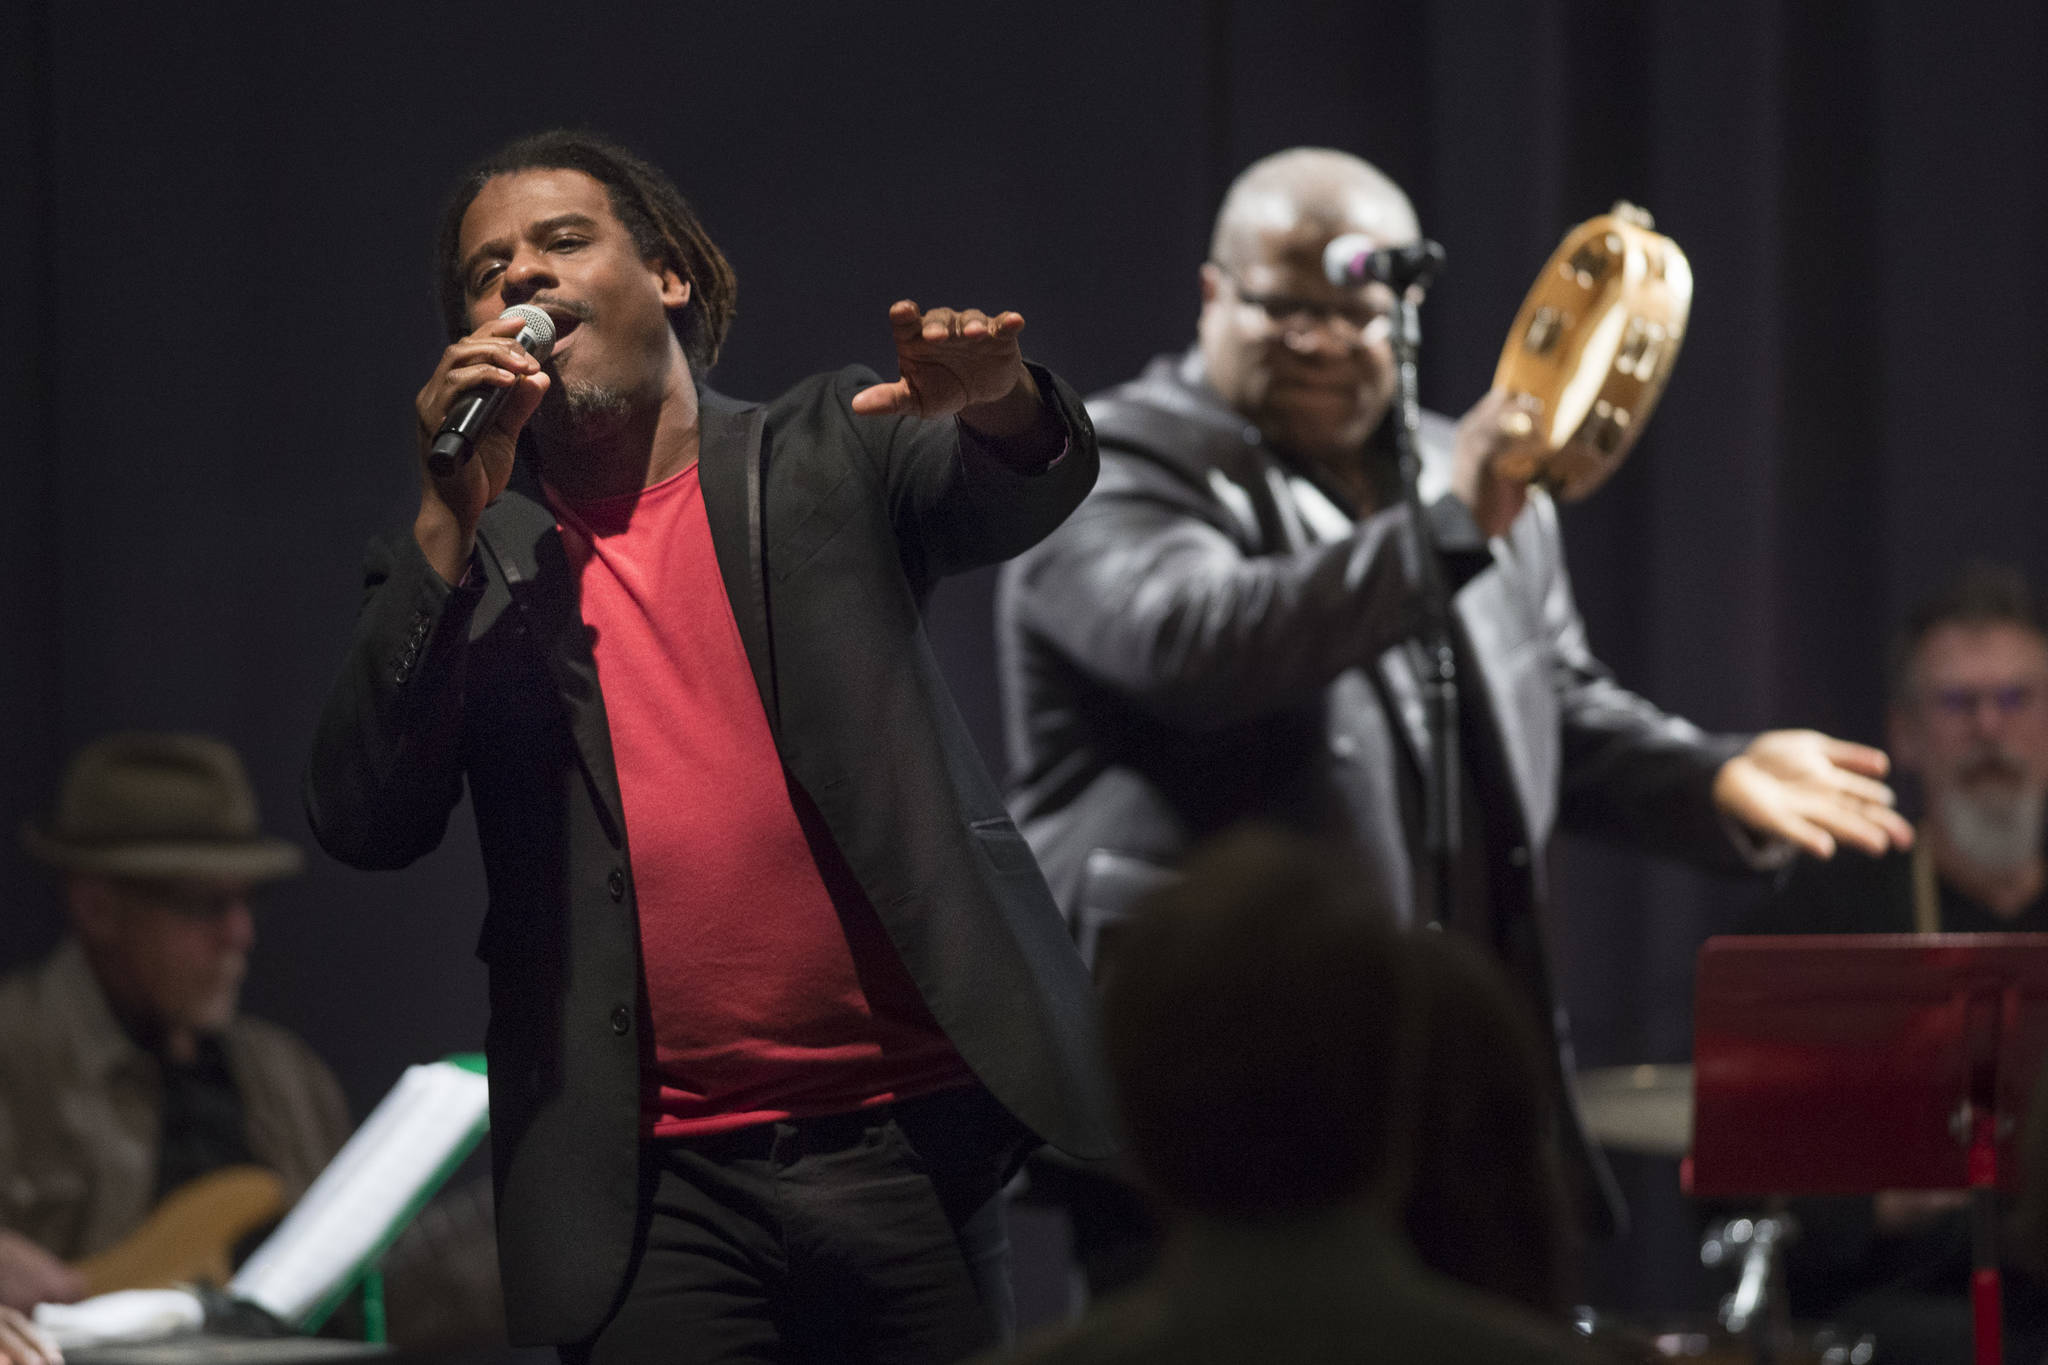 Ryan Shaw, left, sings with Bobby Lewis, during the performance of “Motown for Our Town” at the Juneau Arts & Culture Center on Friday, March 1, 2019. (Michael Penn | Juneau Empire)